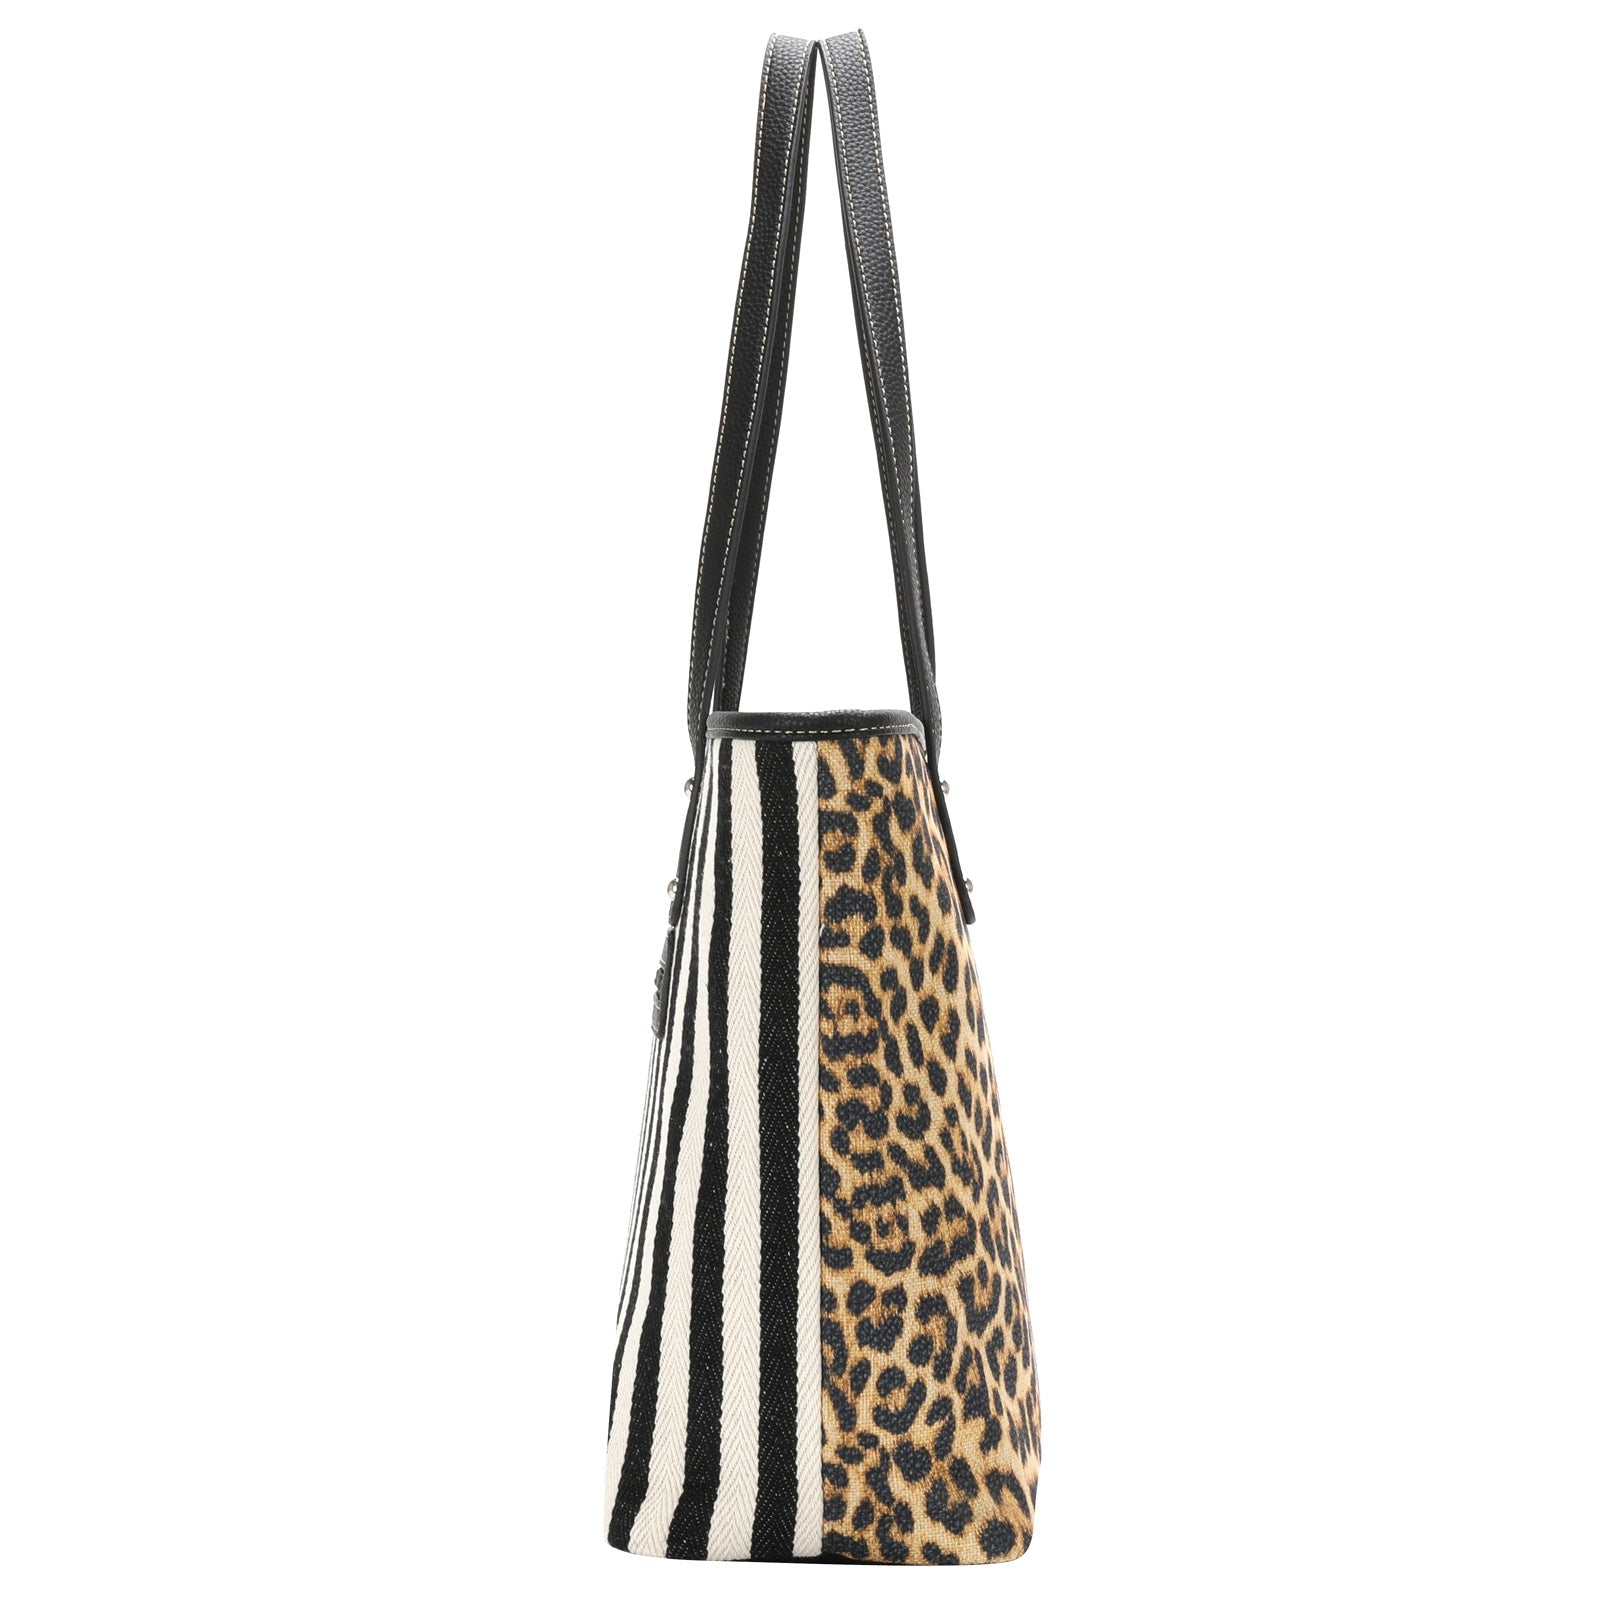 Montana West Leopard Print Canvas Tote Bag - Cowgirl Wear